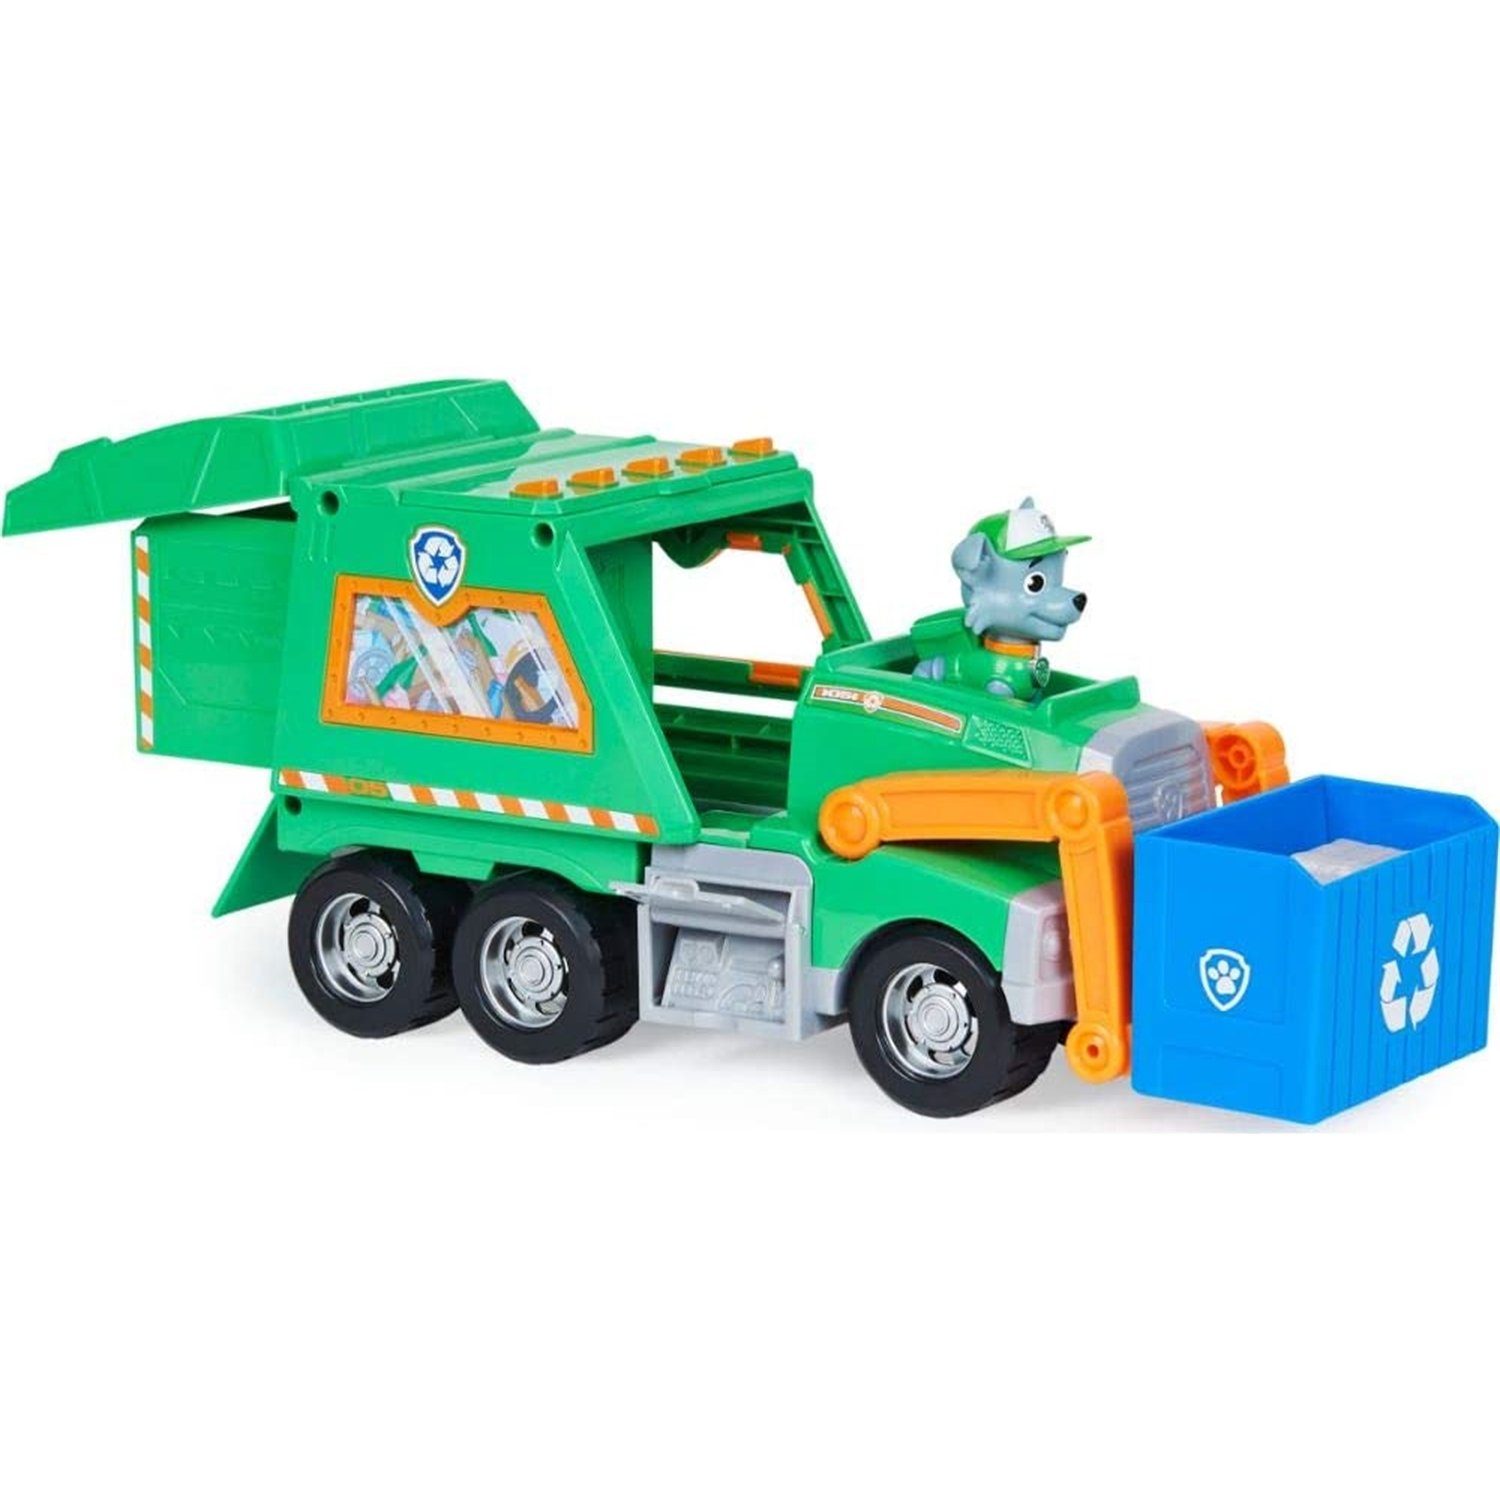 Spin Master Spielzeug-Müllwagen 6060259 Paw Patrol Rockys Deluxe-Recycling-Truck mit